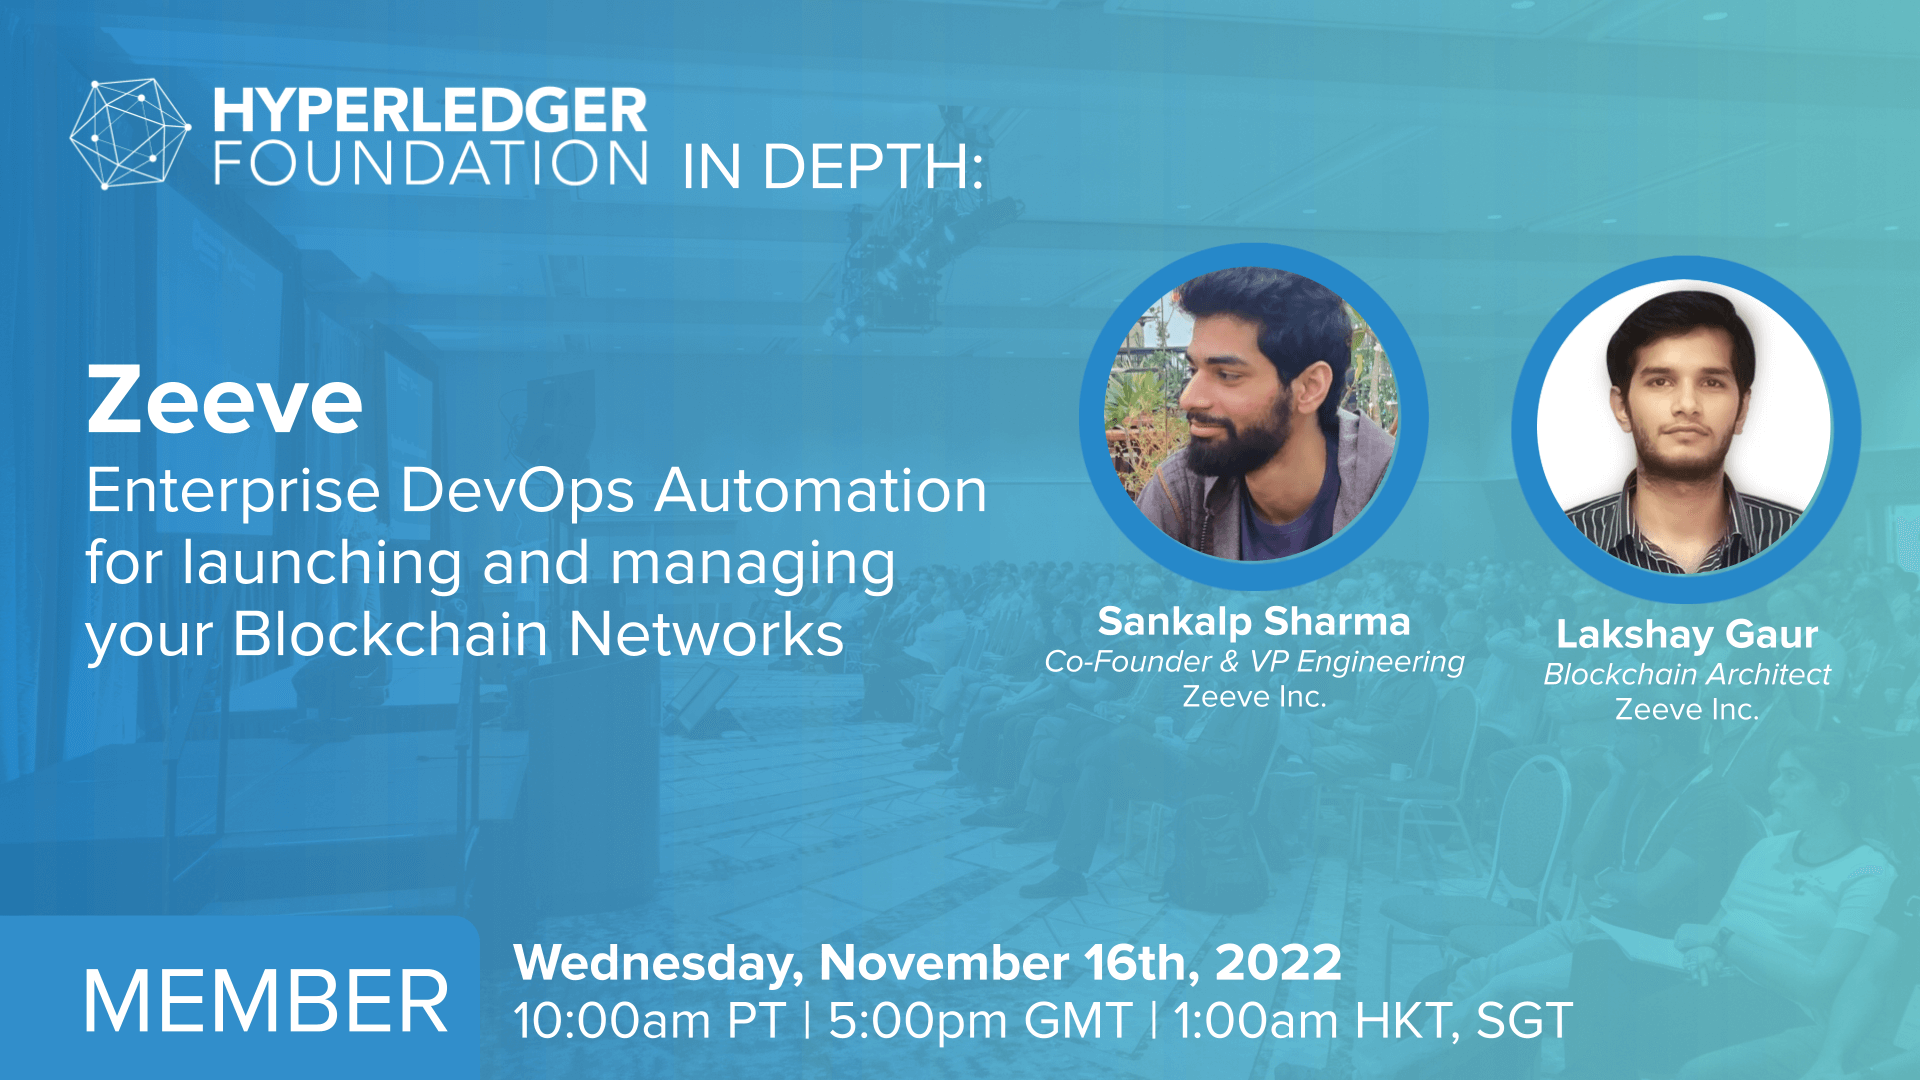  Hyperledger In-depth with Zeeve: Enterprise DevOps Automation for launching and managing your Blockchain Networks